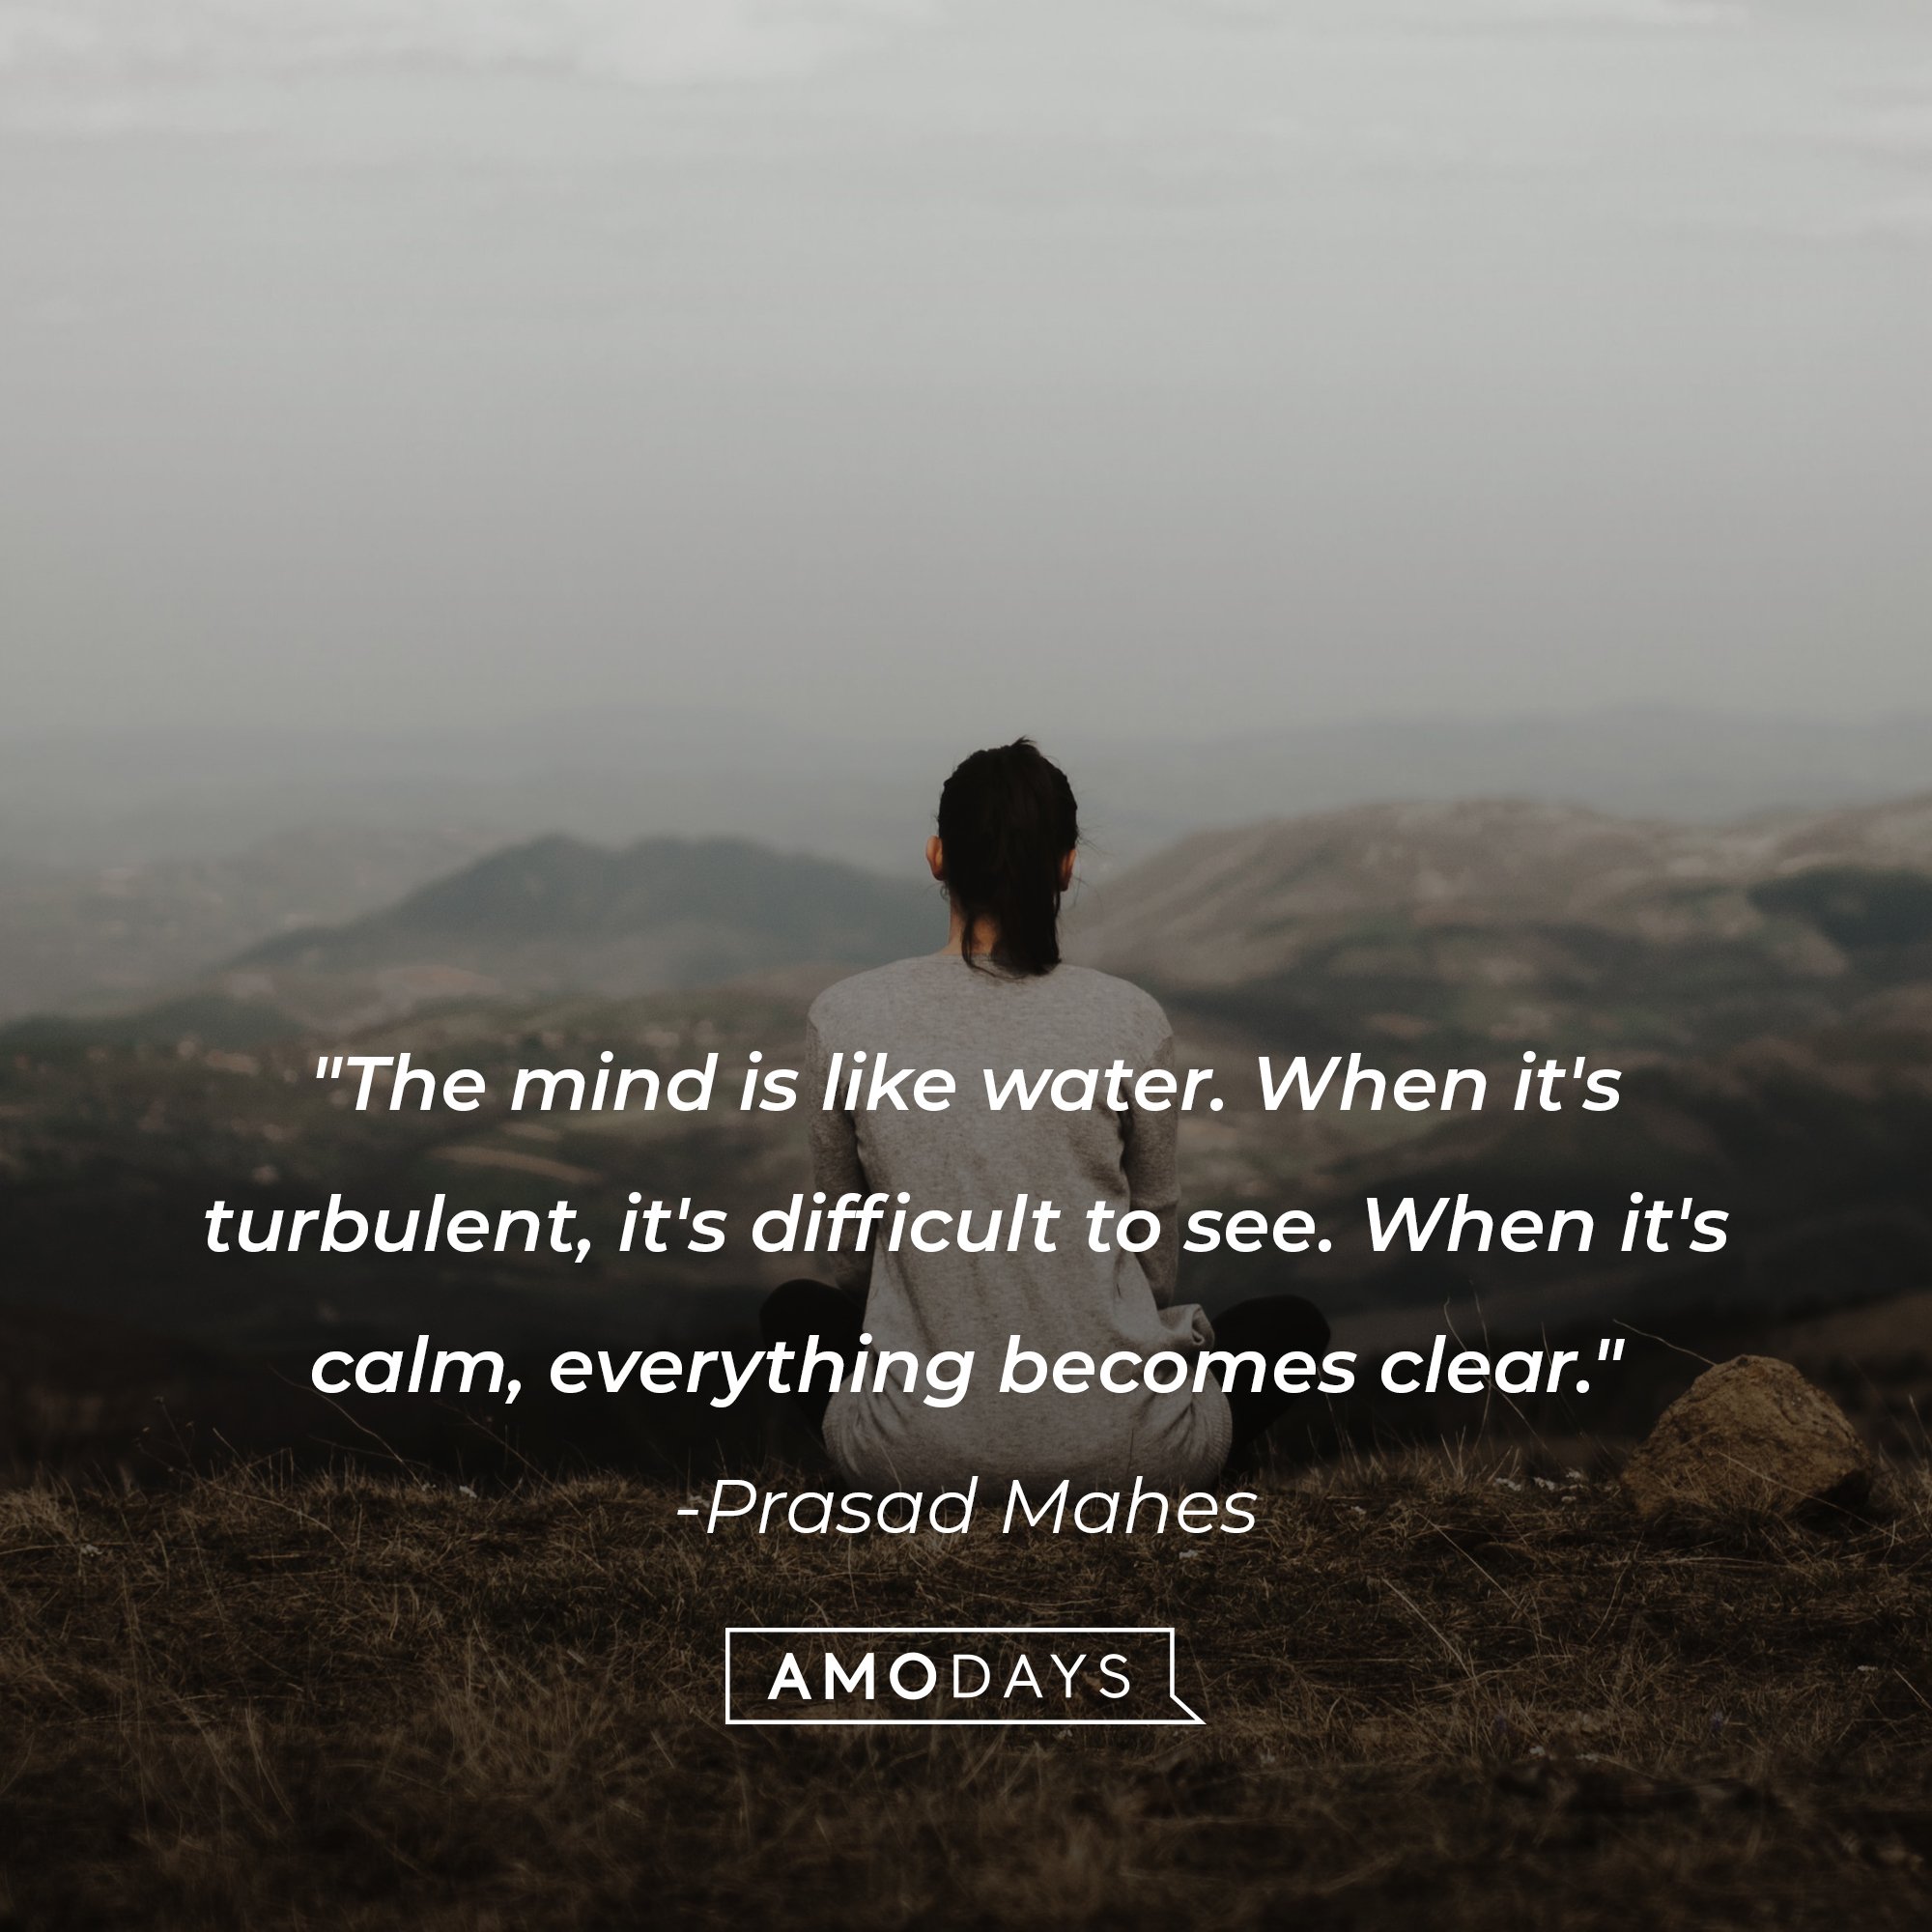 Prasad Mahes’ quote: "The mind is like water. When it's turbulent, it's difficult to see. When it's calm, everything becomes clear." | Image: AmoDays